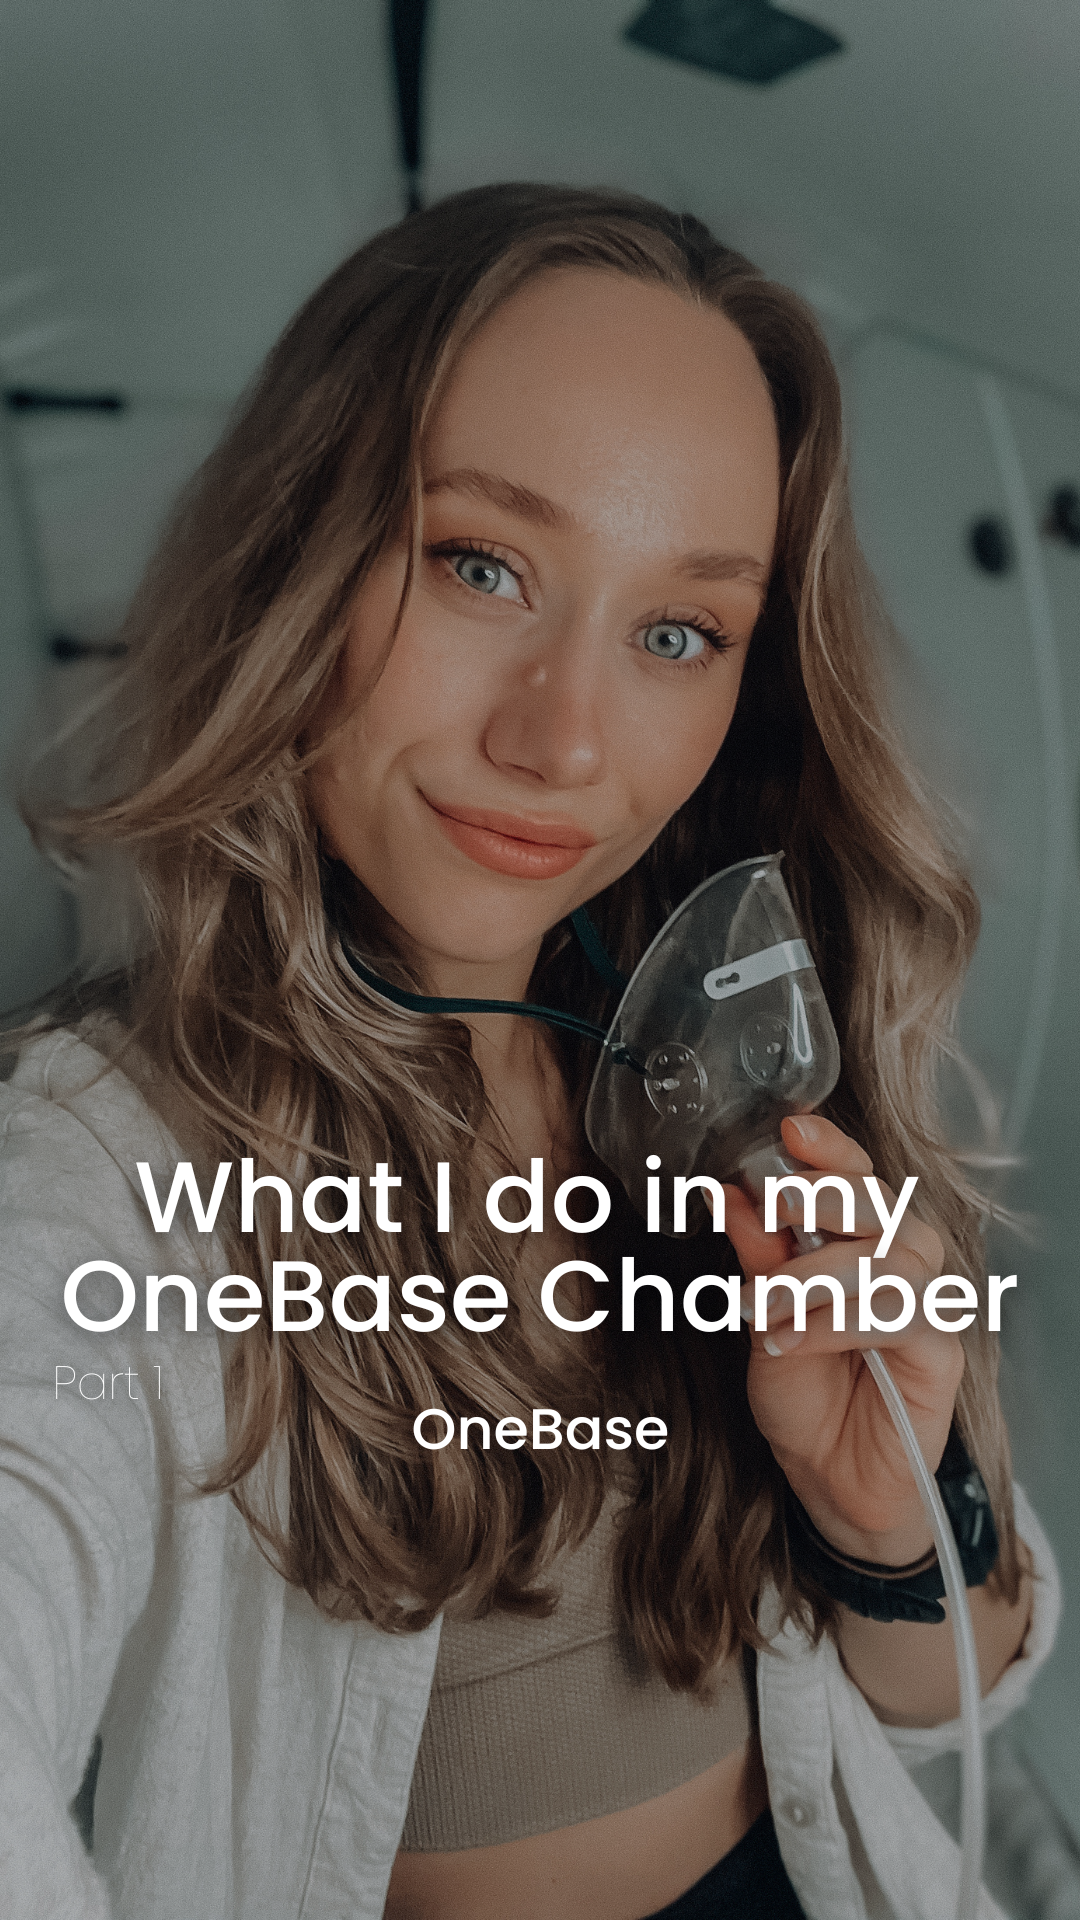 OneBase Hyperbaric Oxygen Chamber - What I do in my chamber